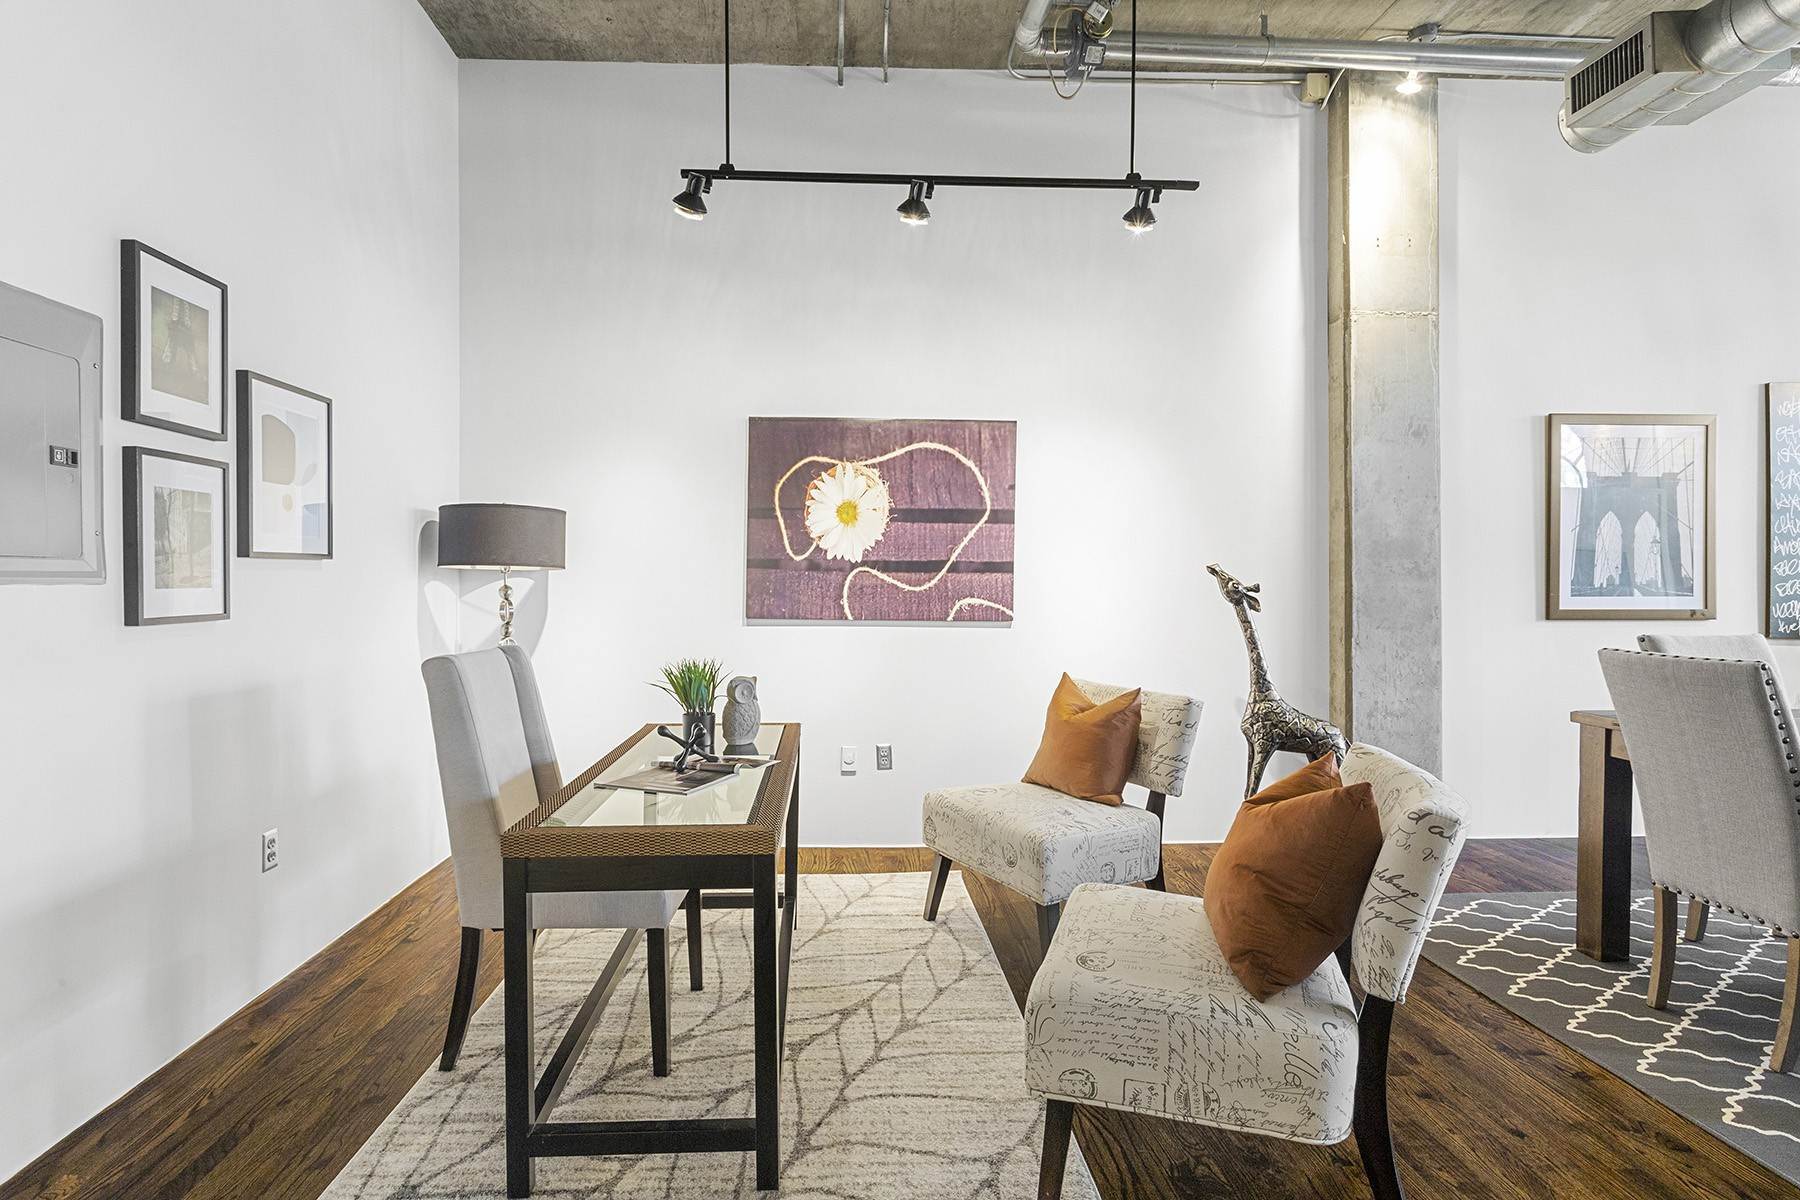 4. Condominiums for Sale at Incredible Opportunity To Acquire A Rare Patio Loft At Mathieson Exchange Lofts 3180 Mathieson Drive, No. 505 Atlanta, Georgia 30305 United States